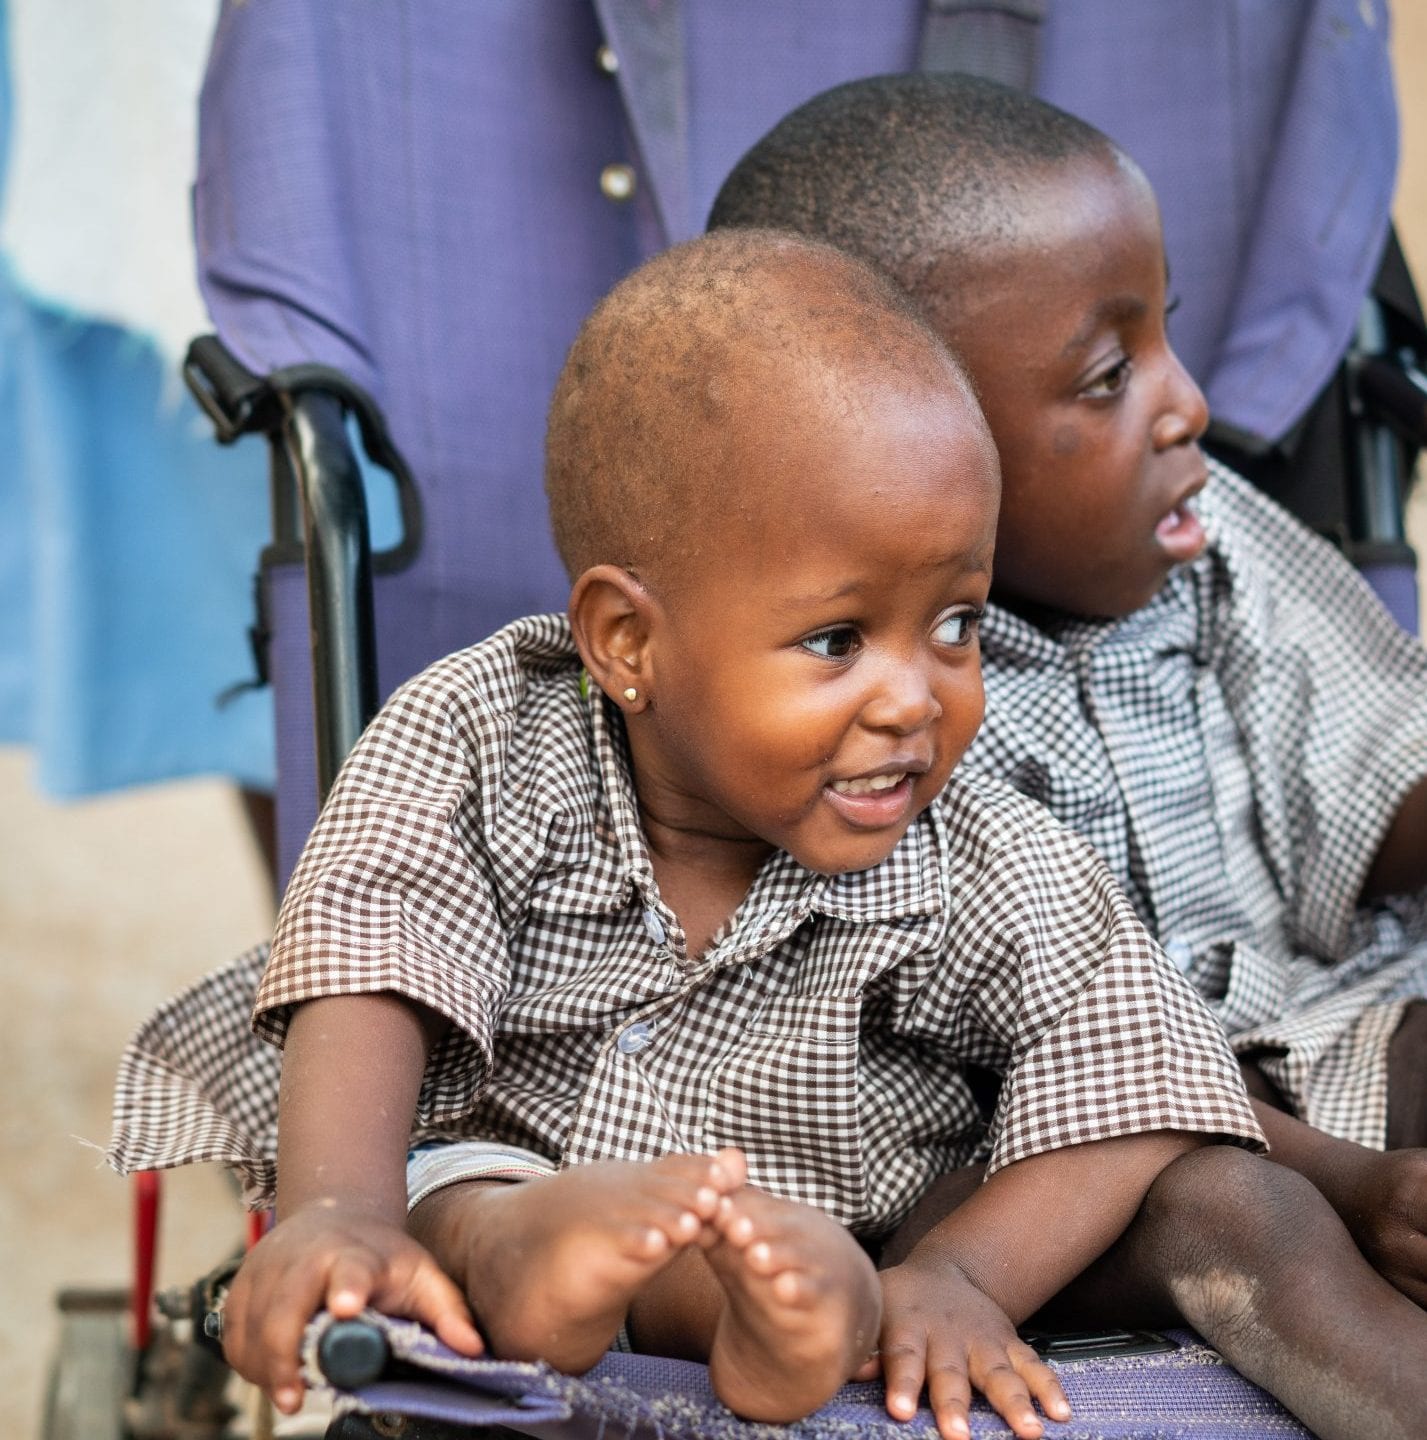 Two young Kenyan children wearing plaid shirts, sitting in a blue chair.